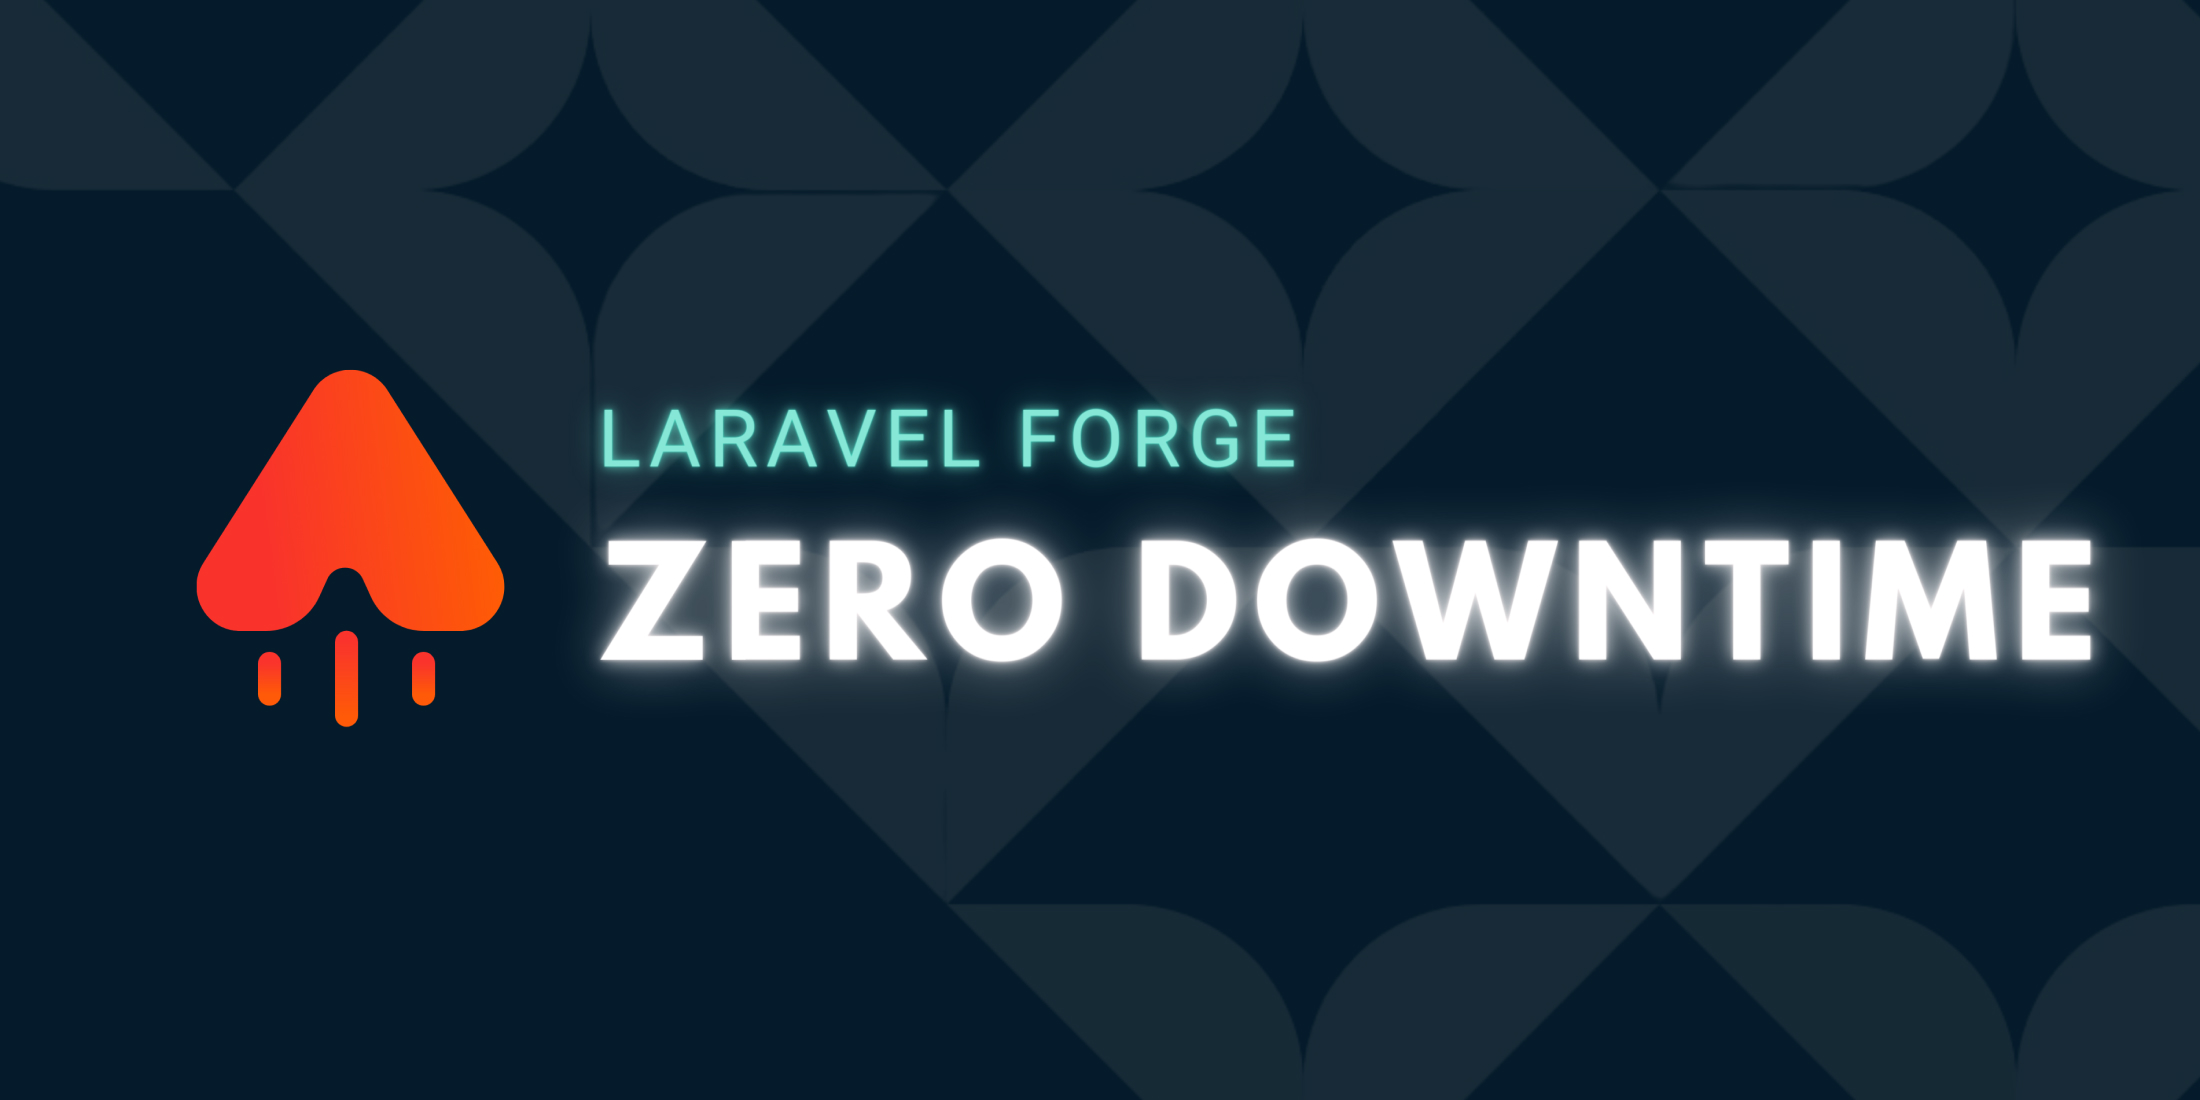 Laravel Forge Introduces Zero Downtime Deployments with Envoyer Integration image